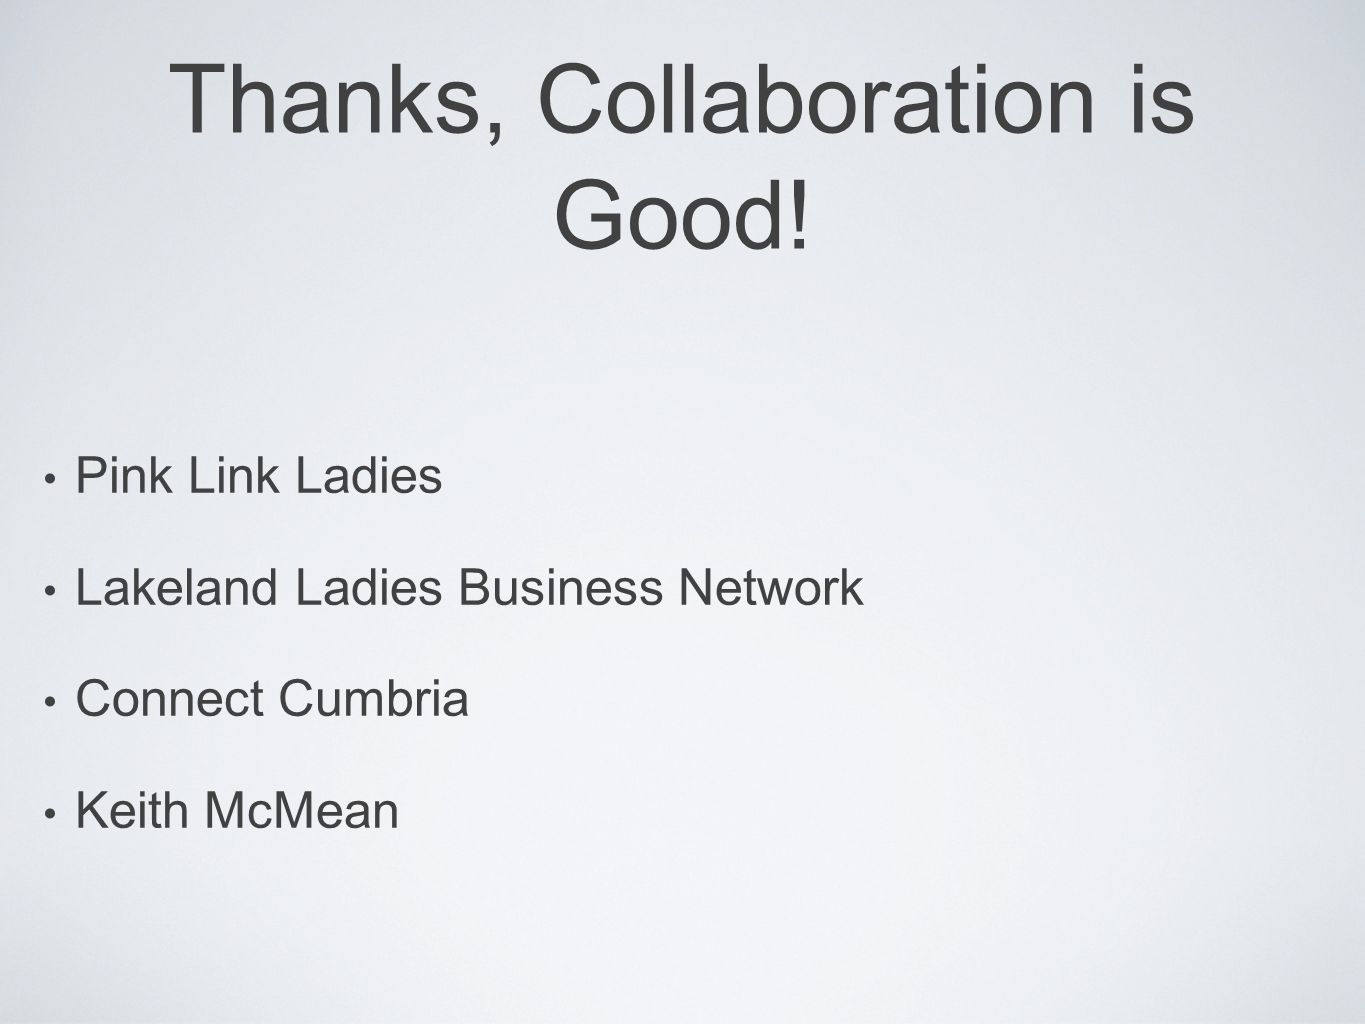 Thanks, Collaboration is Good.